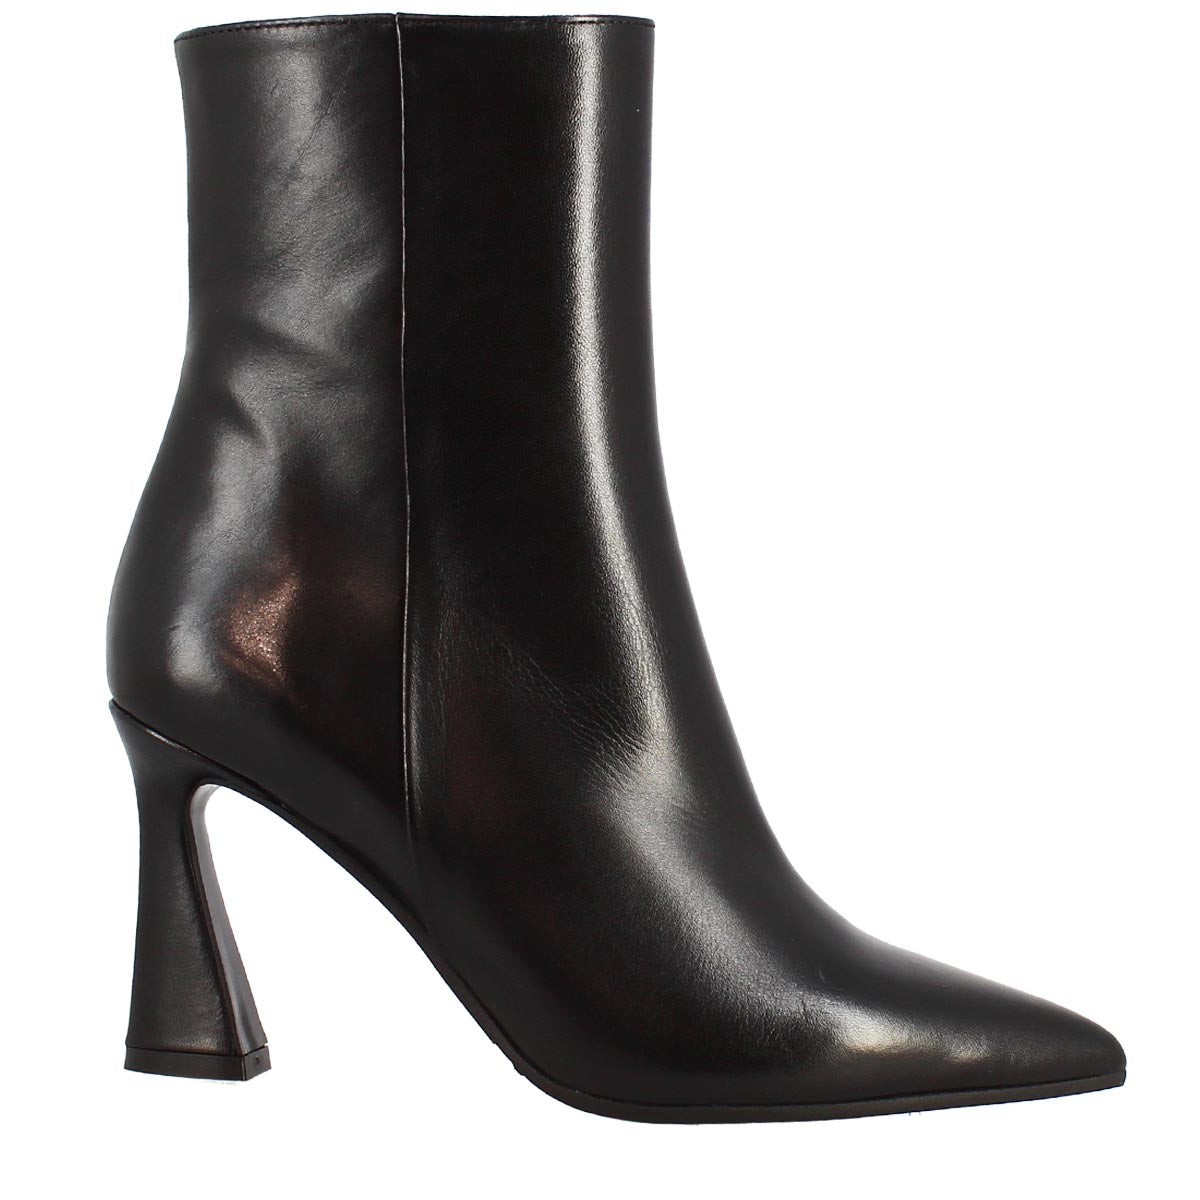 Ankle boot in black Tiffany leather 